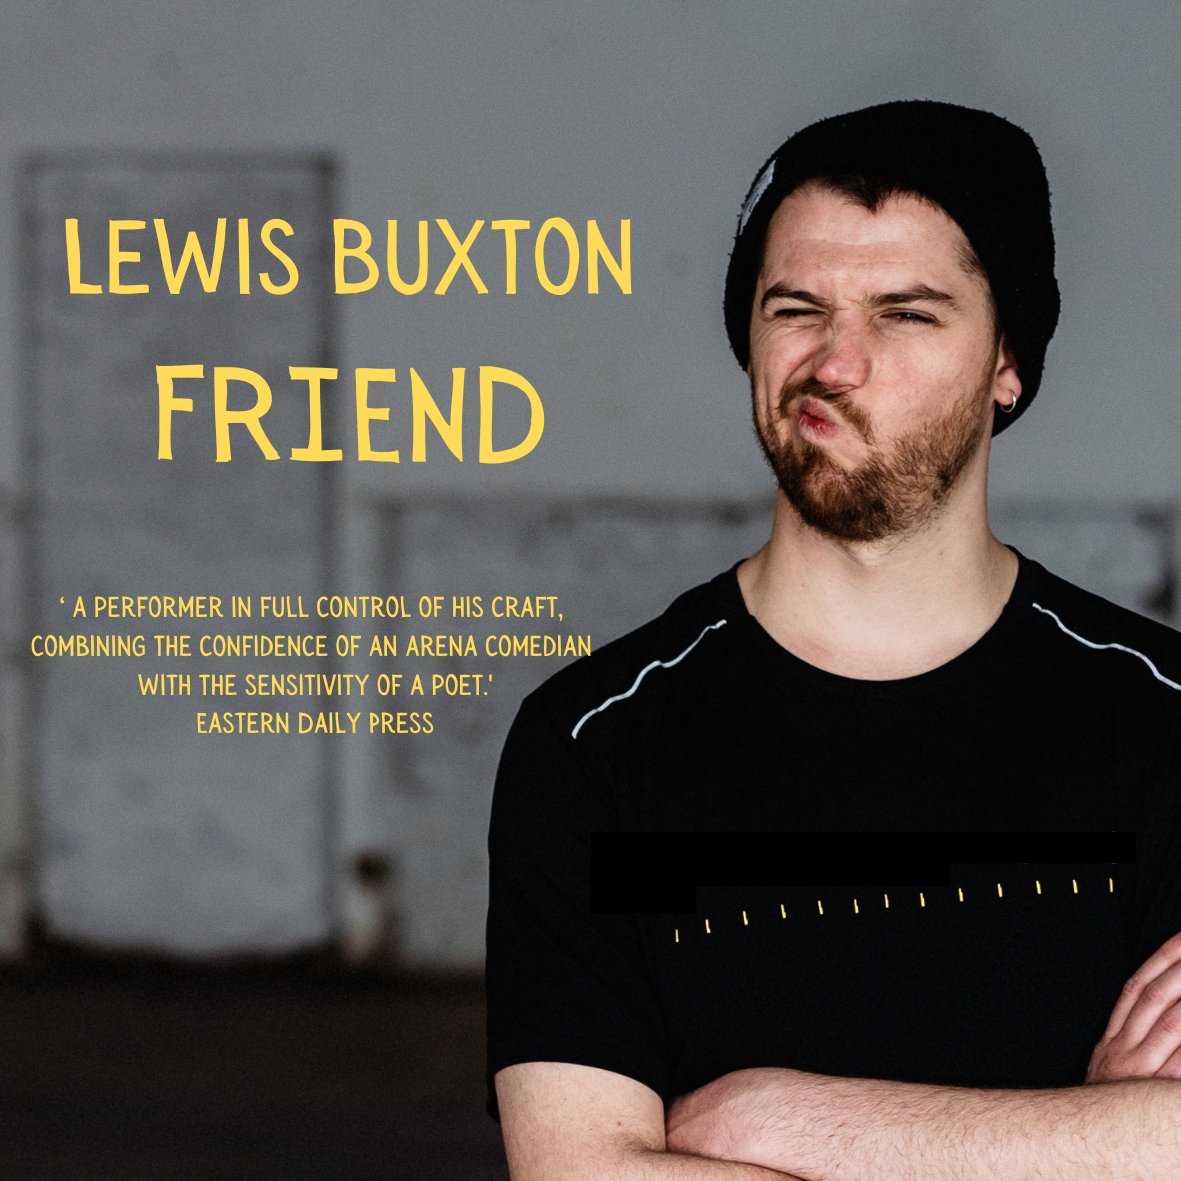 York! Newcastle! Edinburgh! Our lovely director @LewisBuxton93 is on tour in your cities next week. Go and see his marvellous new show FRIEND! lewisbuxton.com/events